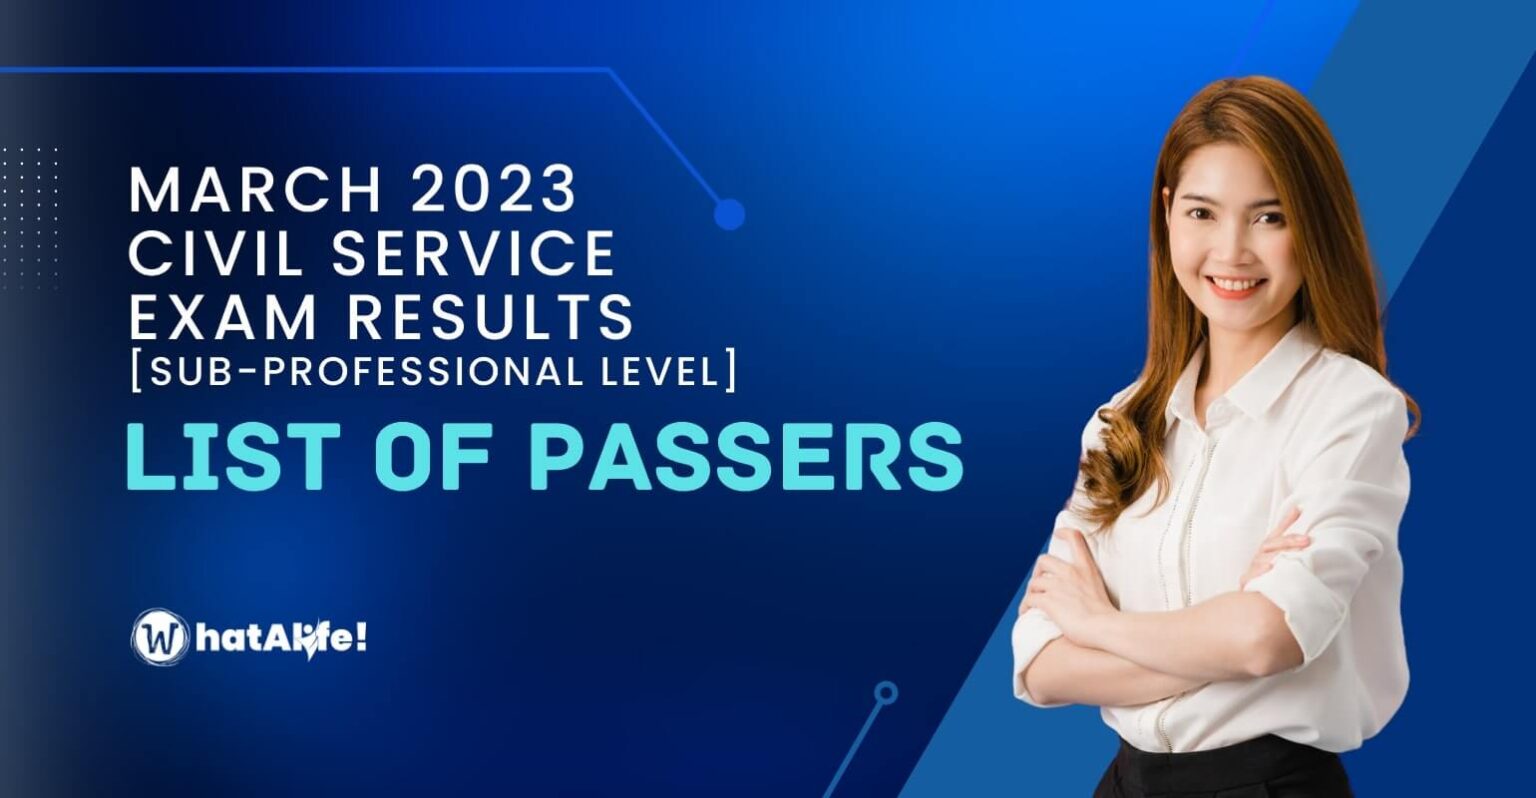 List of PassersMarch 2023 Civil Service Exam Results WhatALife!